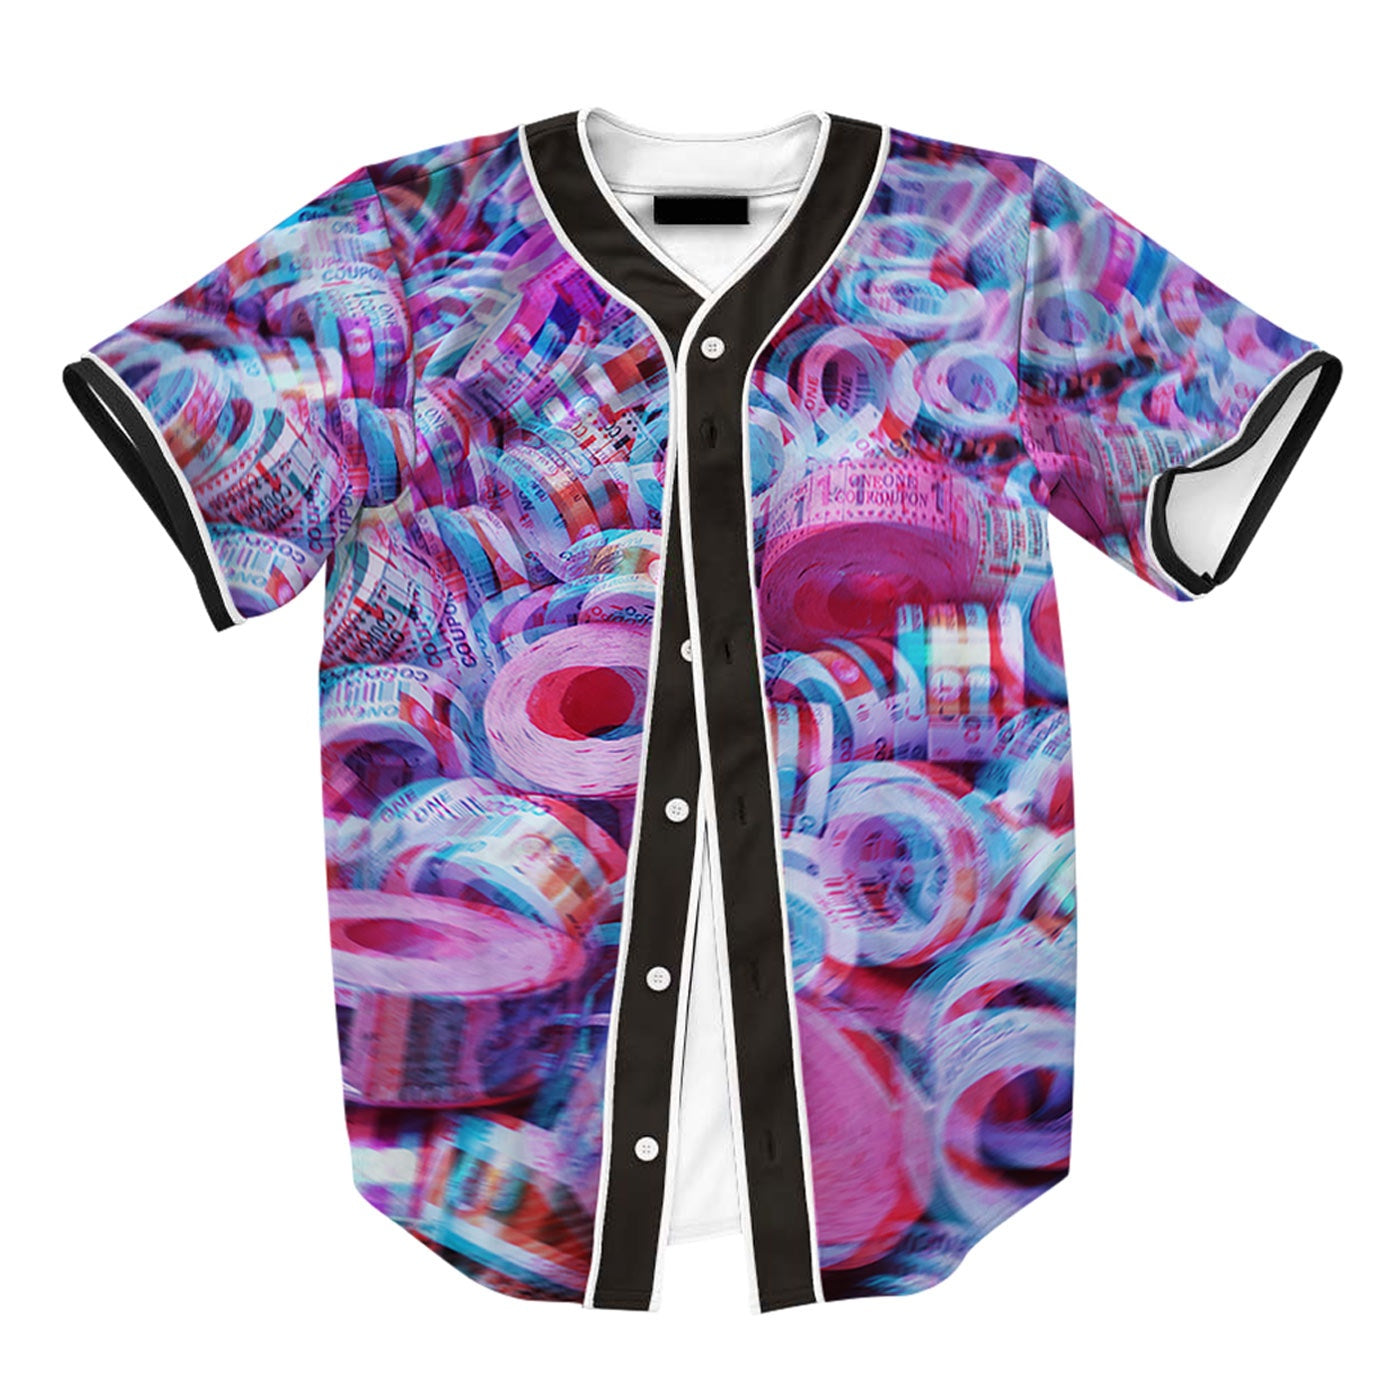 Psychedelic Jersey